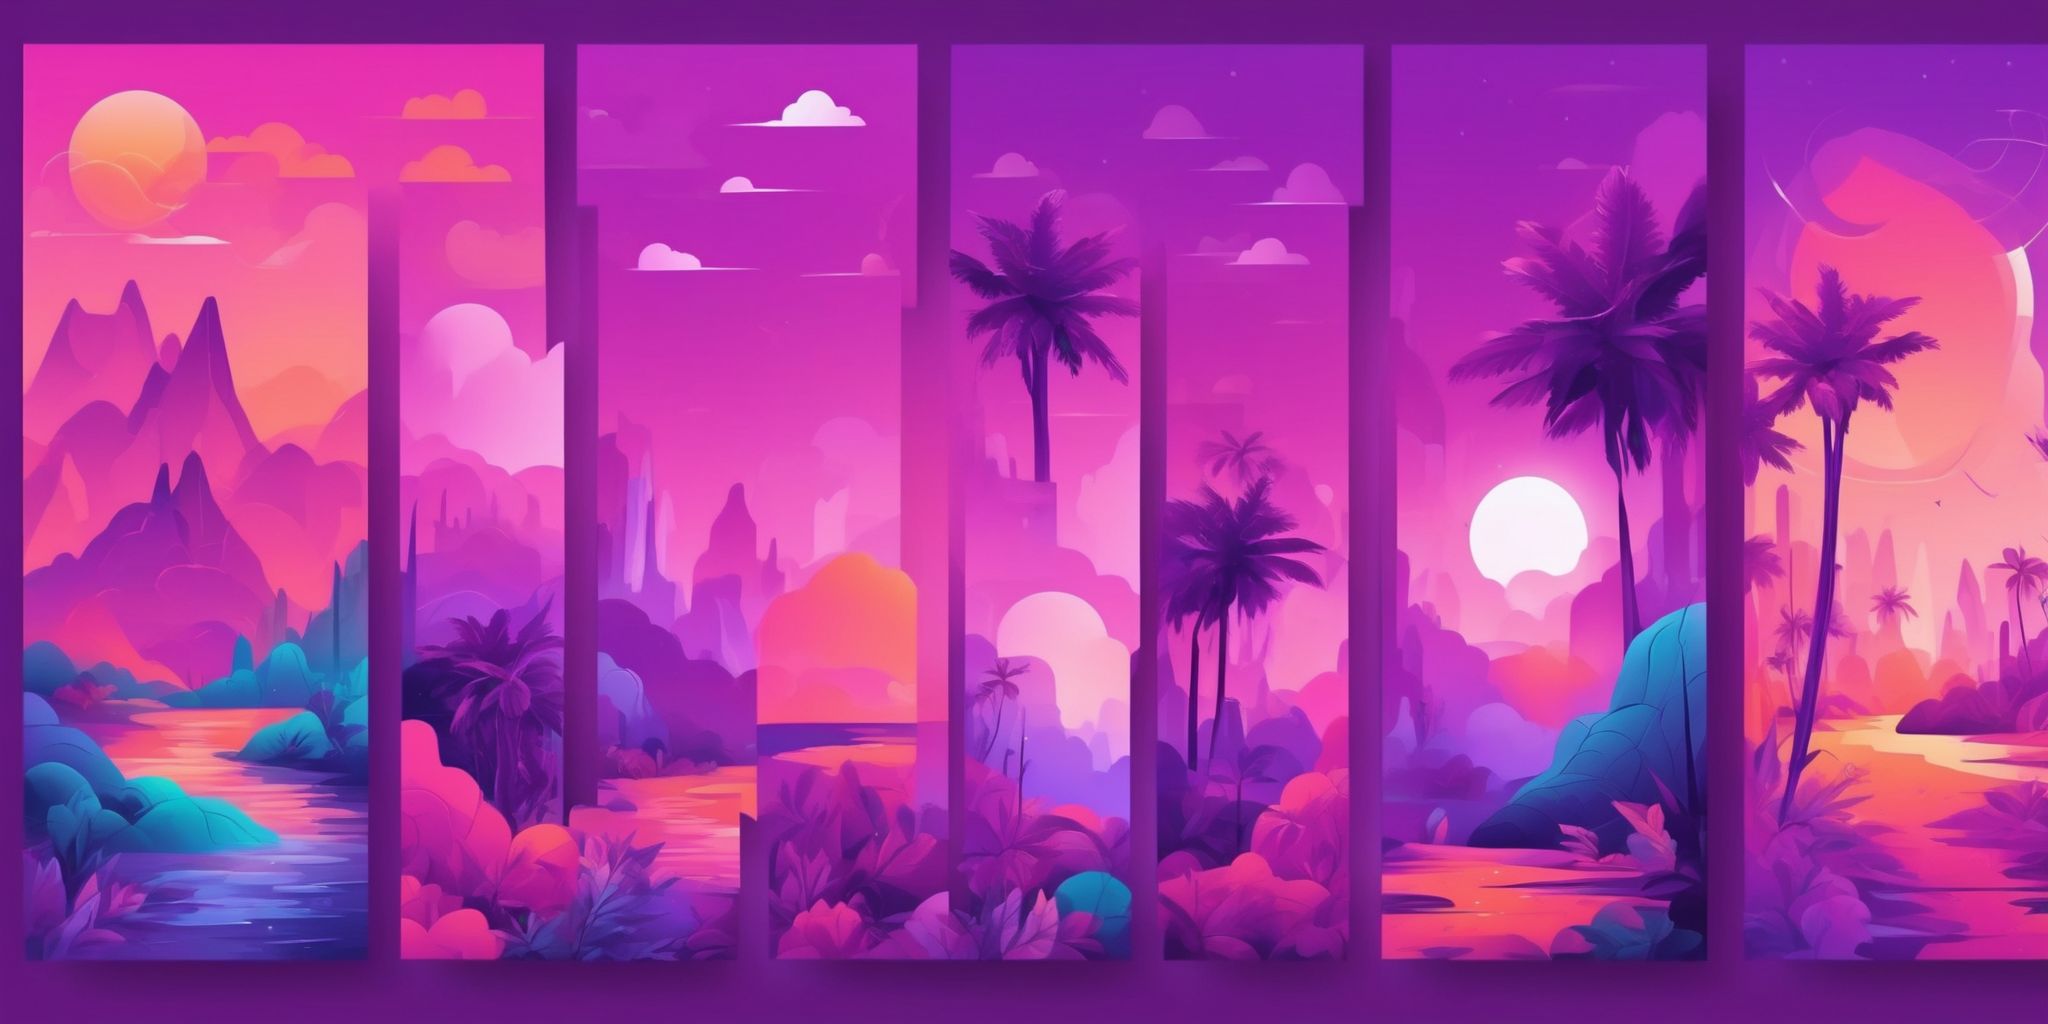 Images in flat illustration style, colorful purple gradient colors